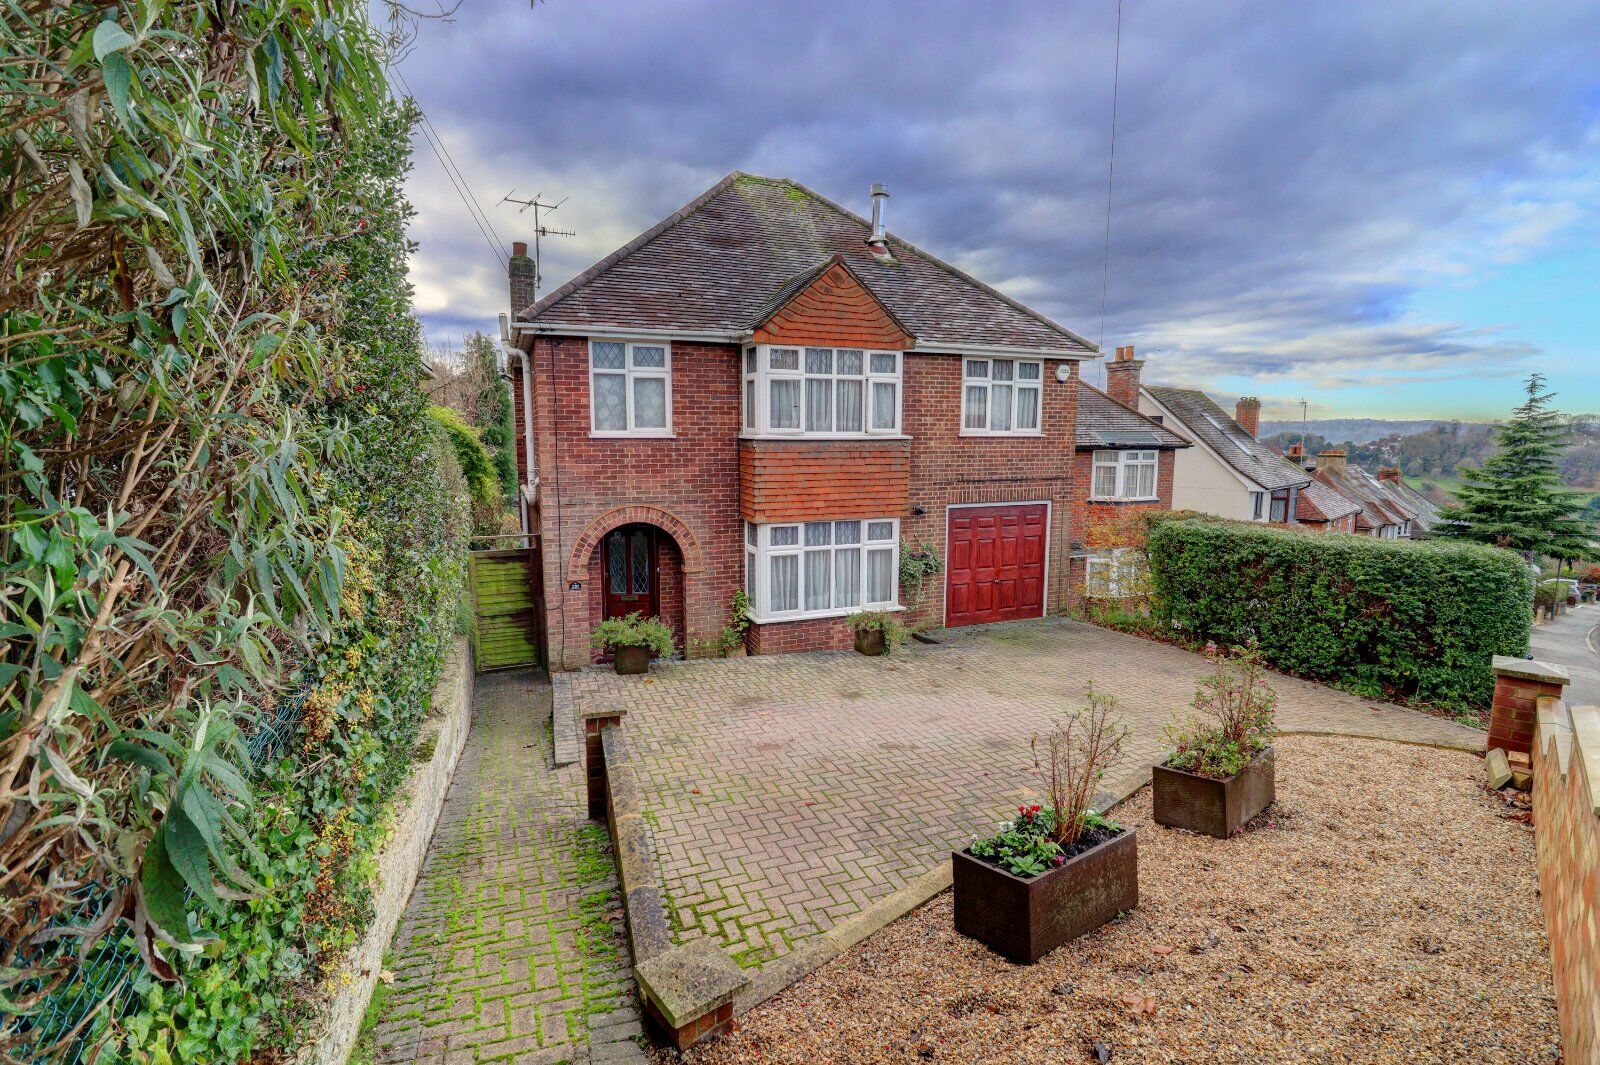 4 bedroom detached house for sale Totteridge Road, High Wycombe, HP13, main image